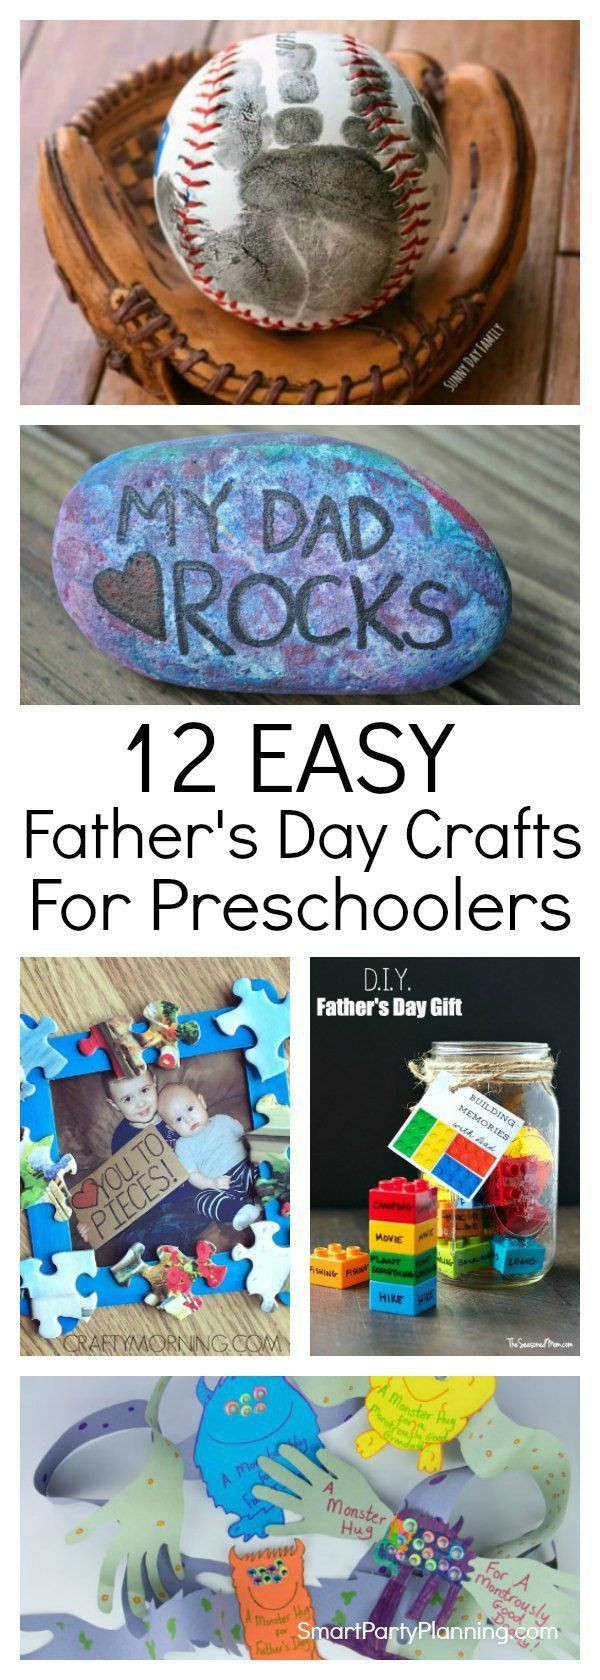 Mother's Day Craft For Preschoolers
 12 Easy Father s Day Crafts For Preschoolers To Make